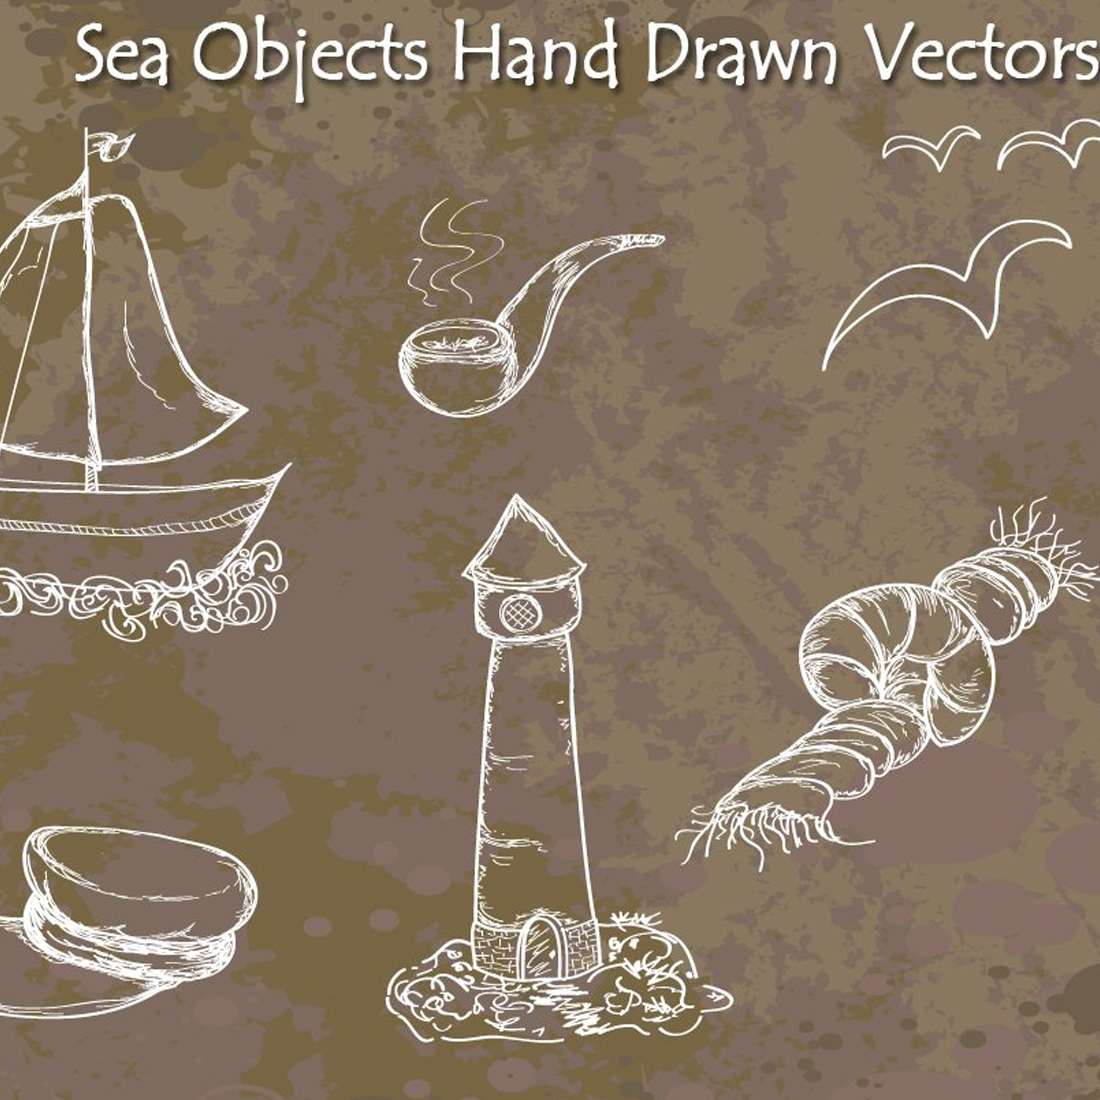 Images preview sea objects hand drawn vectors.